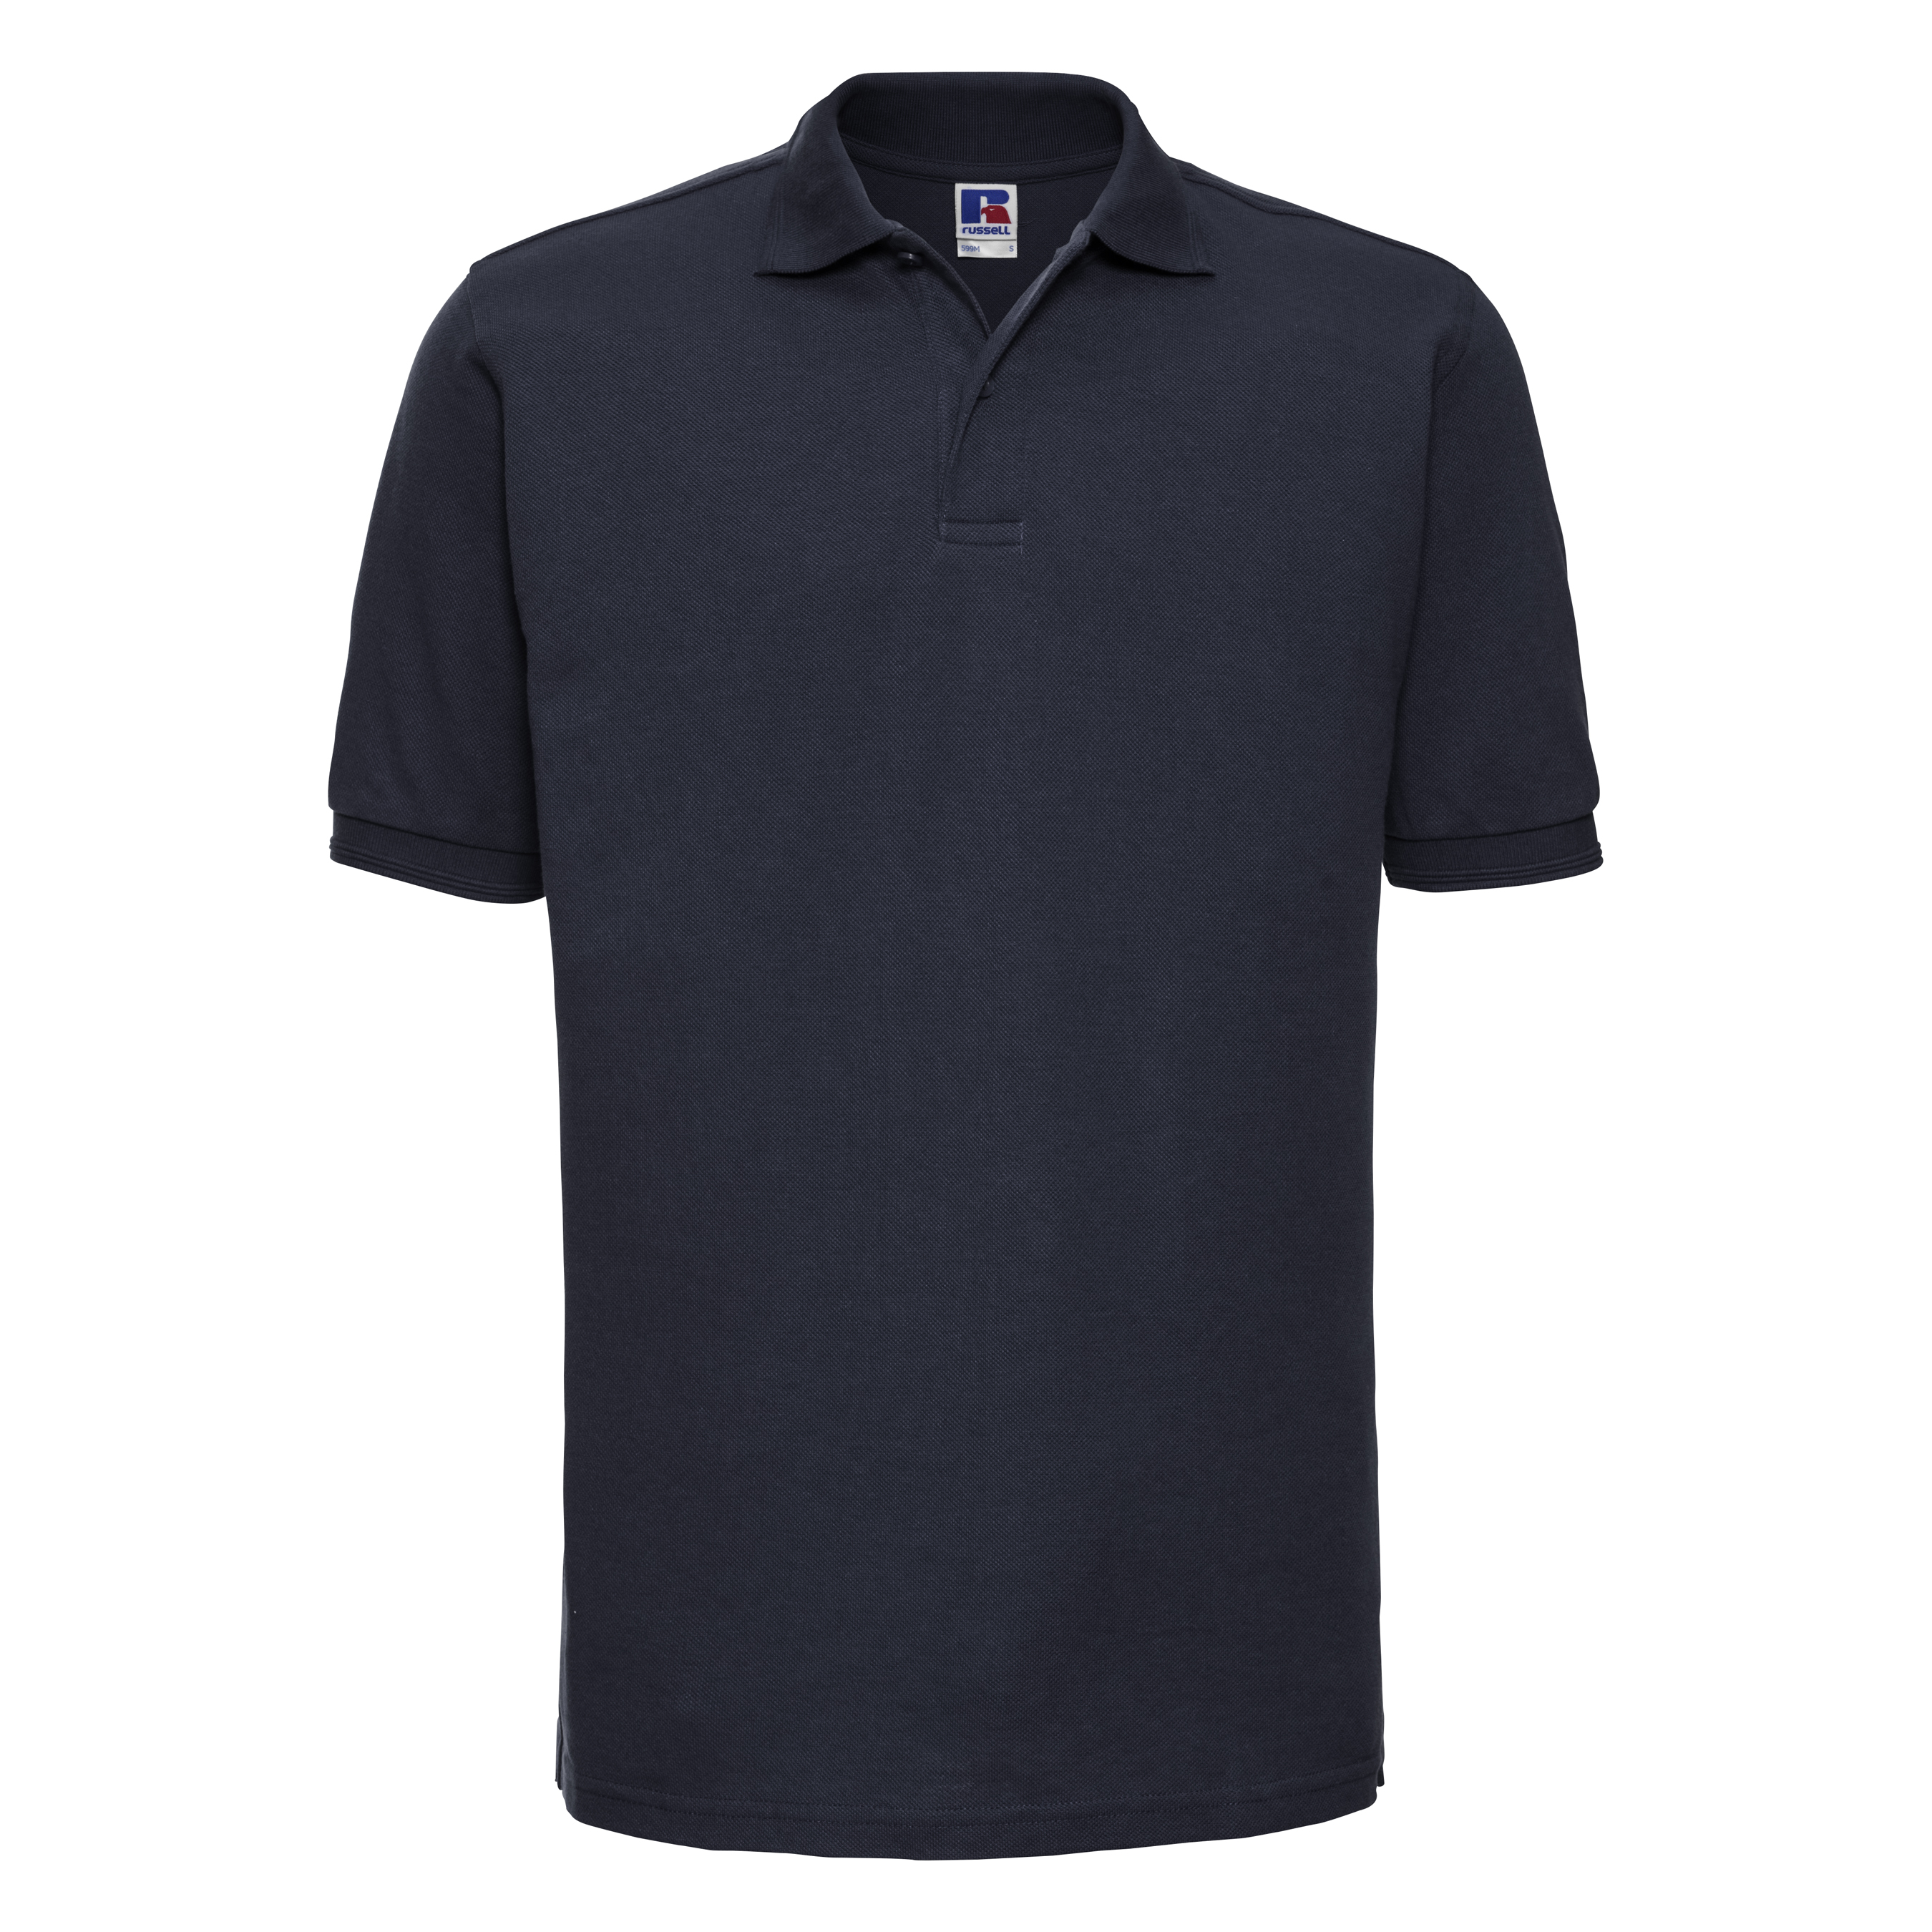 ax-httpswebsystems.s3.amazonaws.comtmp_for_downloadrussell-hardwearing-wash-polo-french-navy.jpg